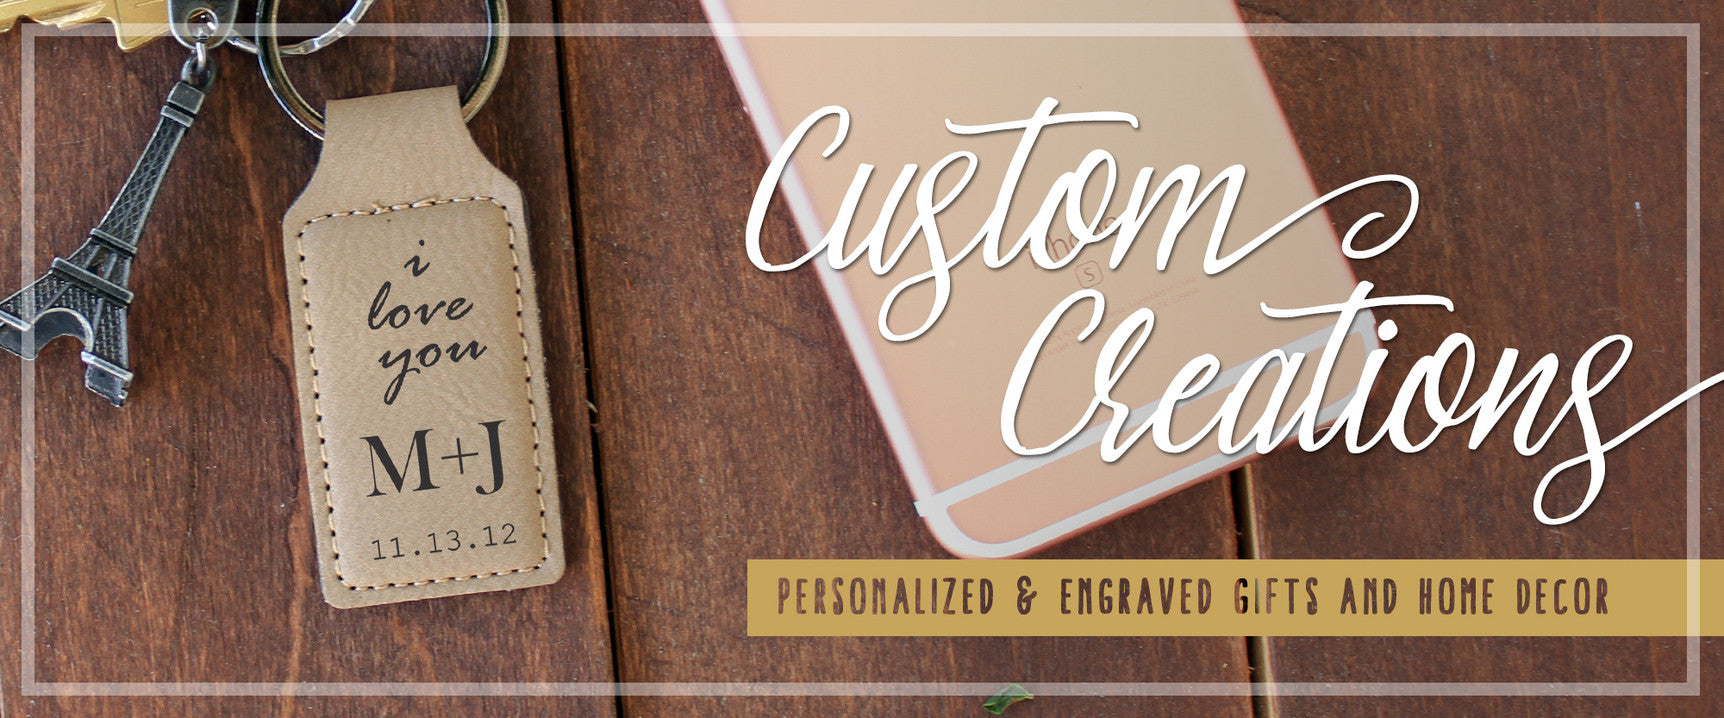 Custom Creations. Personalized and engraved gifts and home decor.